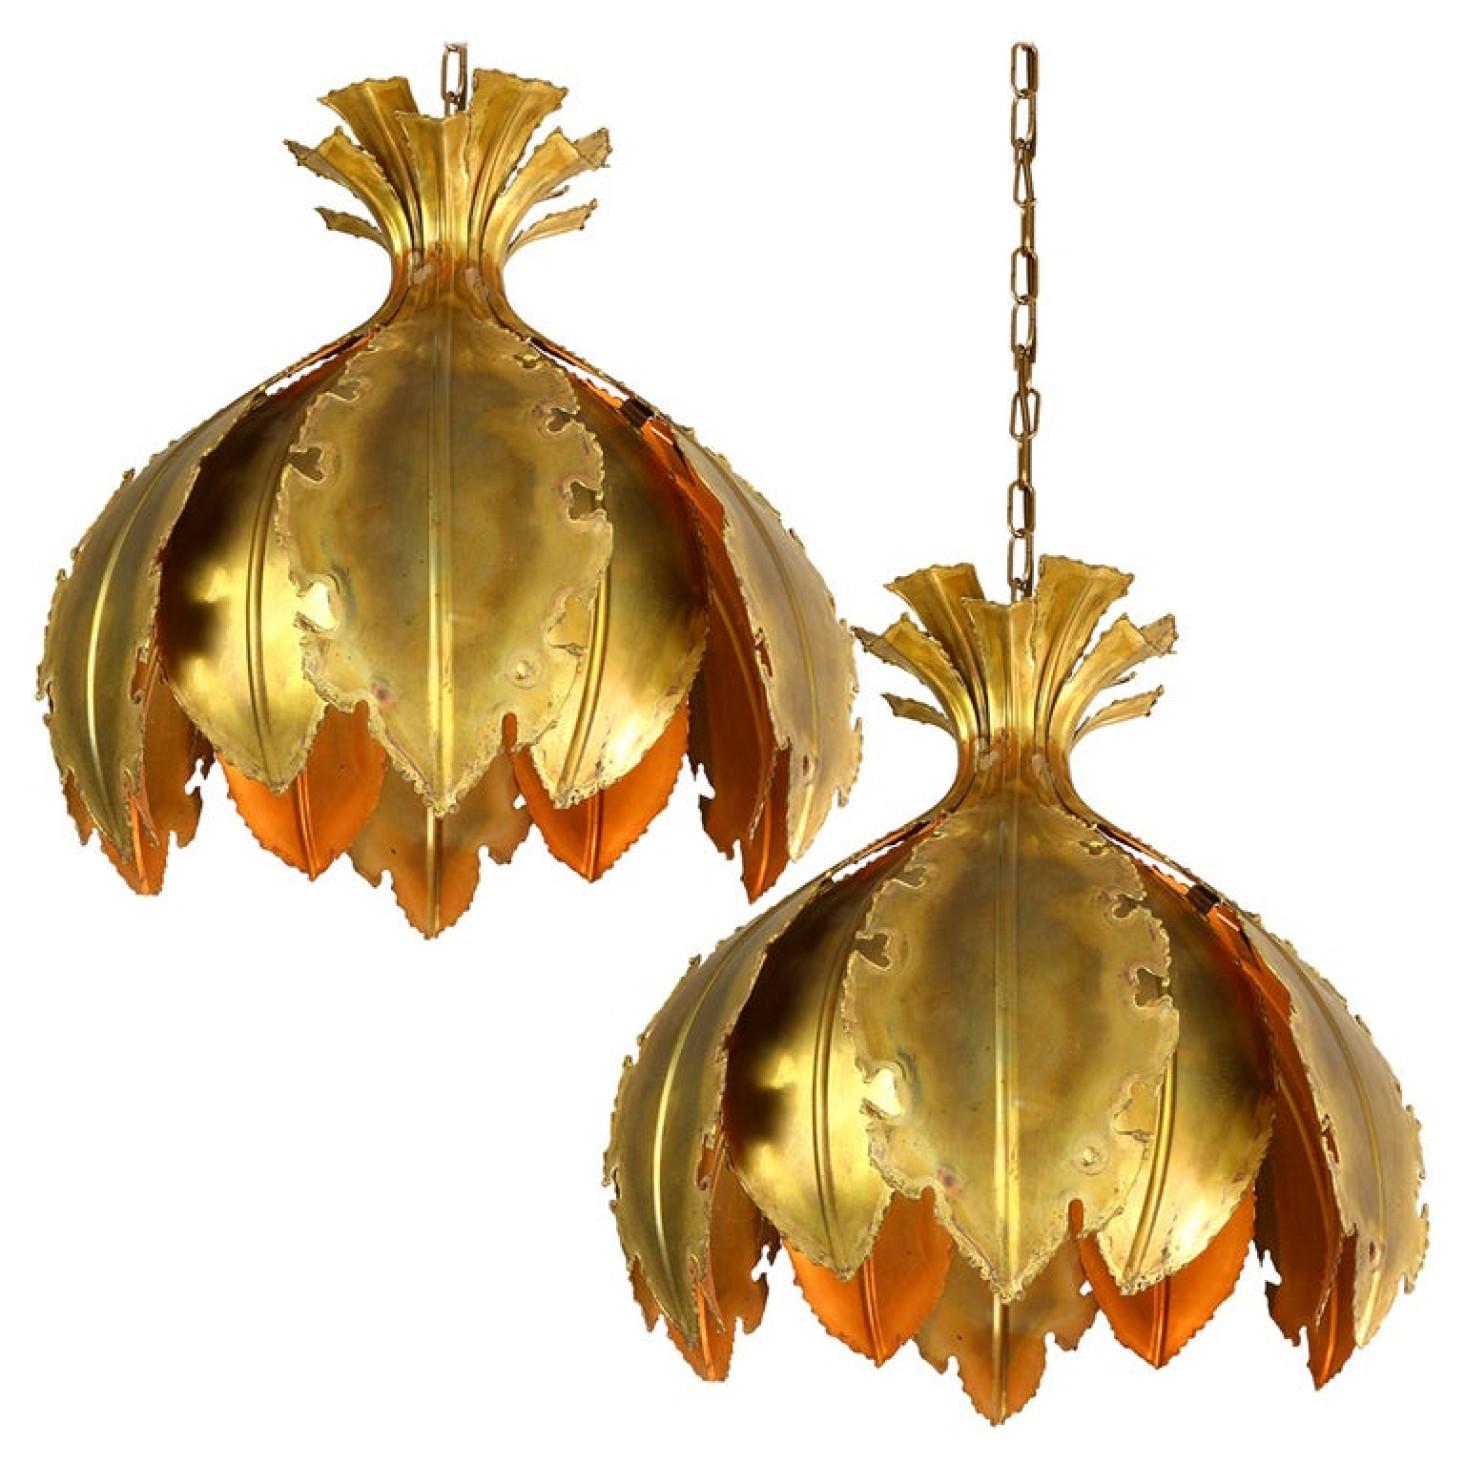 Pair of Svend Aage for Holm Sorensen Brutalist acid treated brass pendant lamps. Manufactured in Denmark during the 1960s. Original and well kept. Each Brutalist pendant ceiling light composed of large acid treated leaves welded together.

The lamp